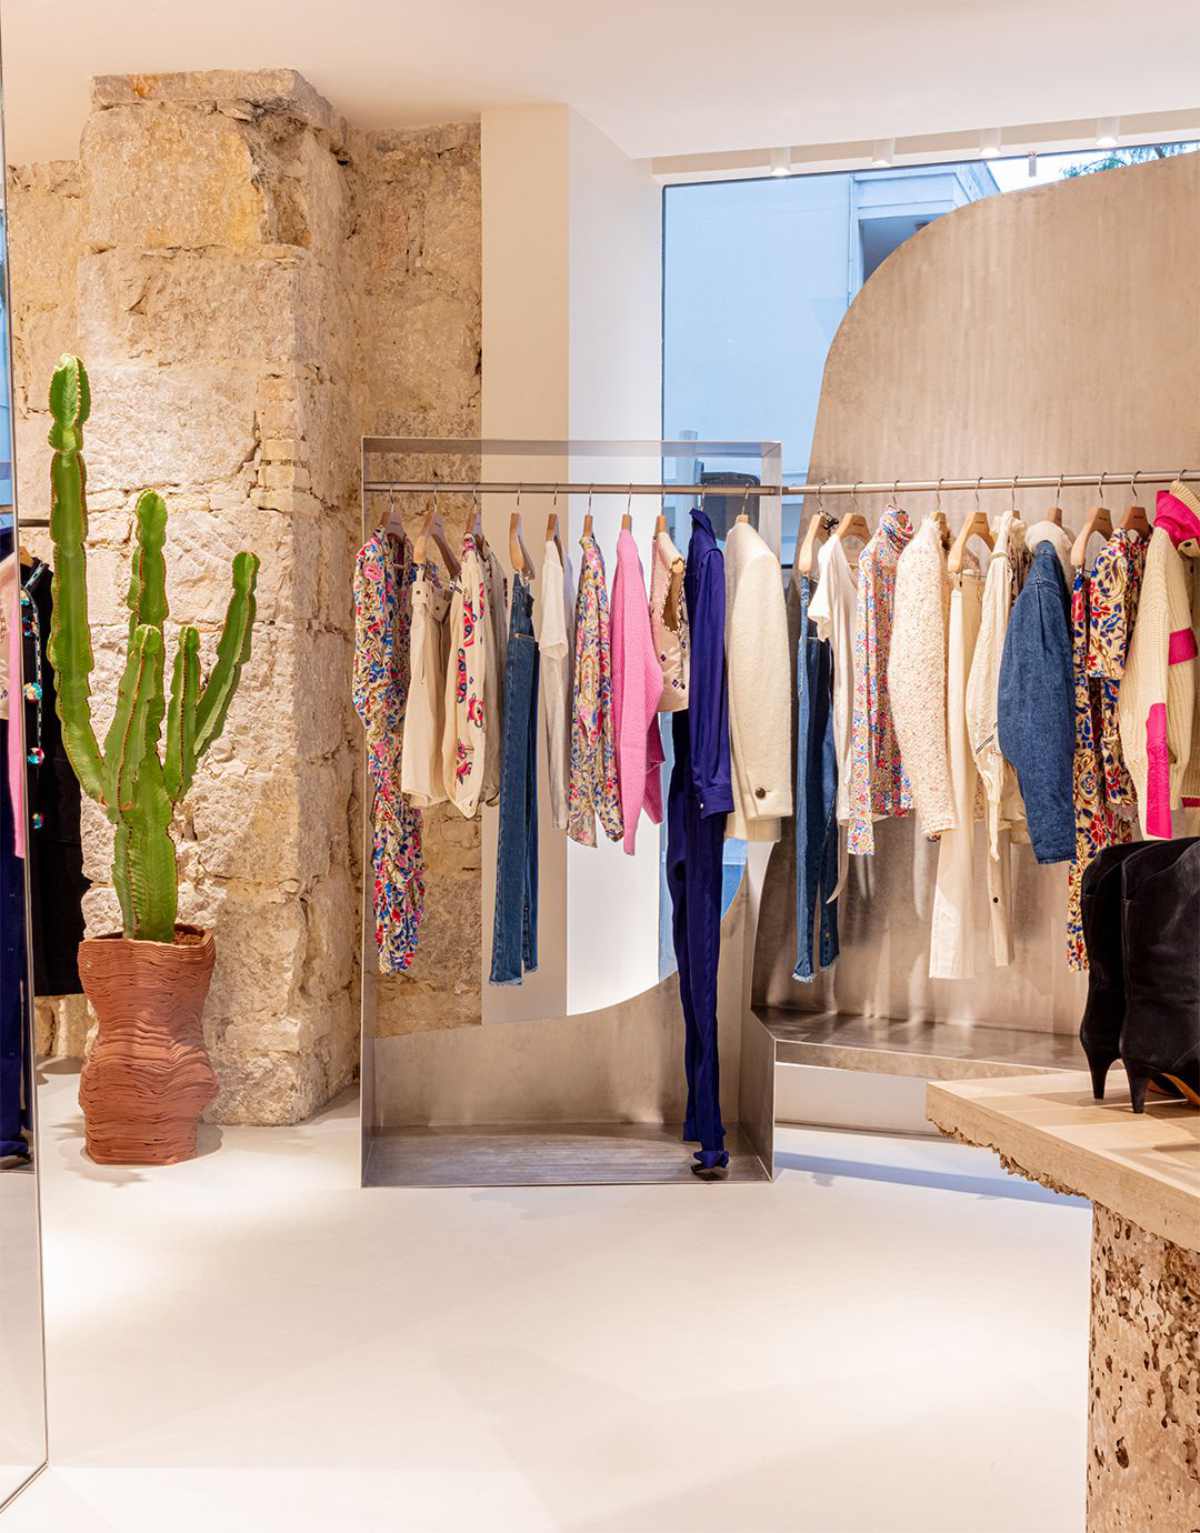 Isabel Marant Opend Her First Store In Nice, France